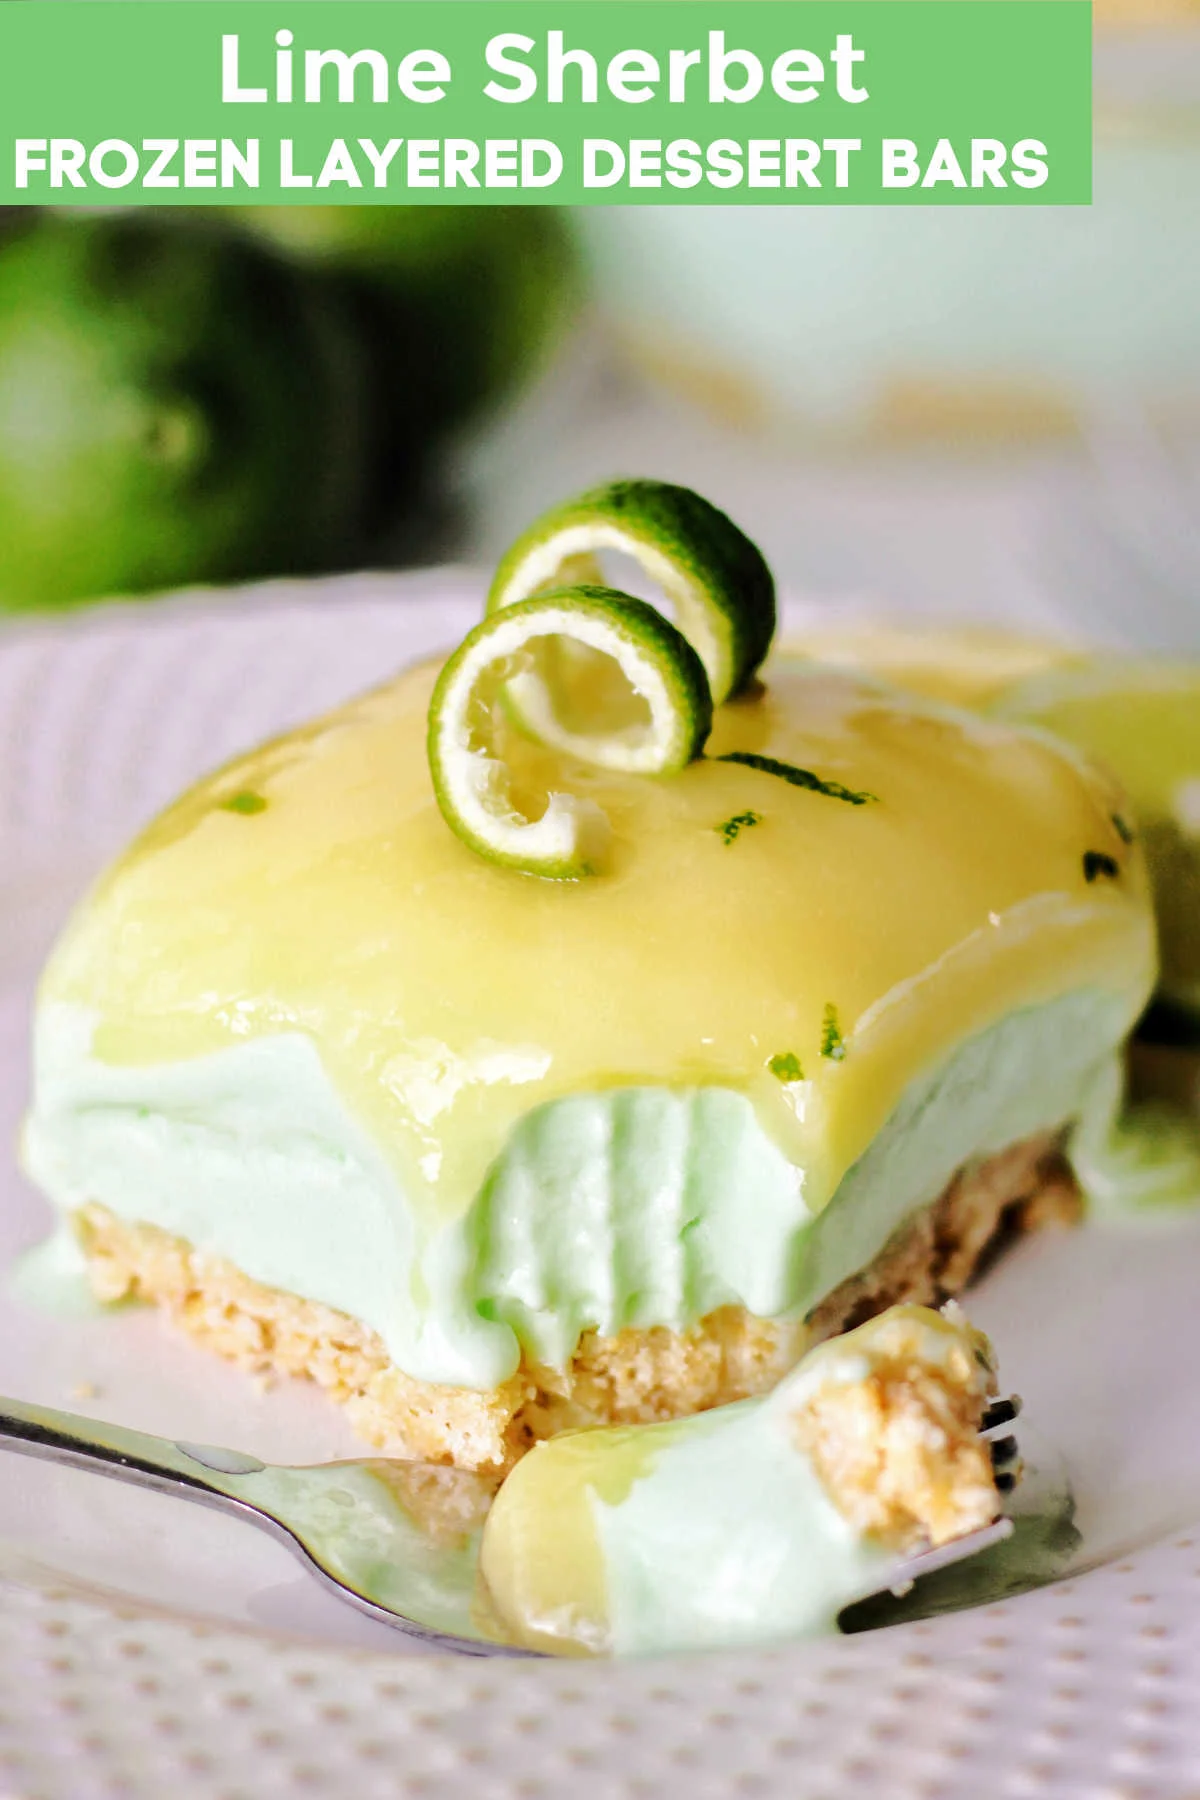 Frozen layered lime sherbet bars have a great balance of sweet and salty, cold and creamy. Plus they have the perfect amount of tart too. Whip some up to see for yourself.